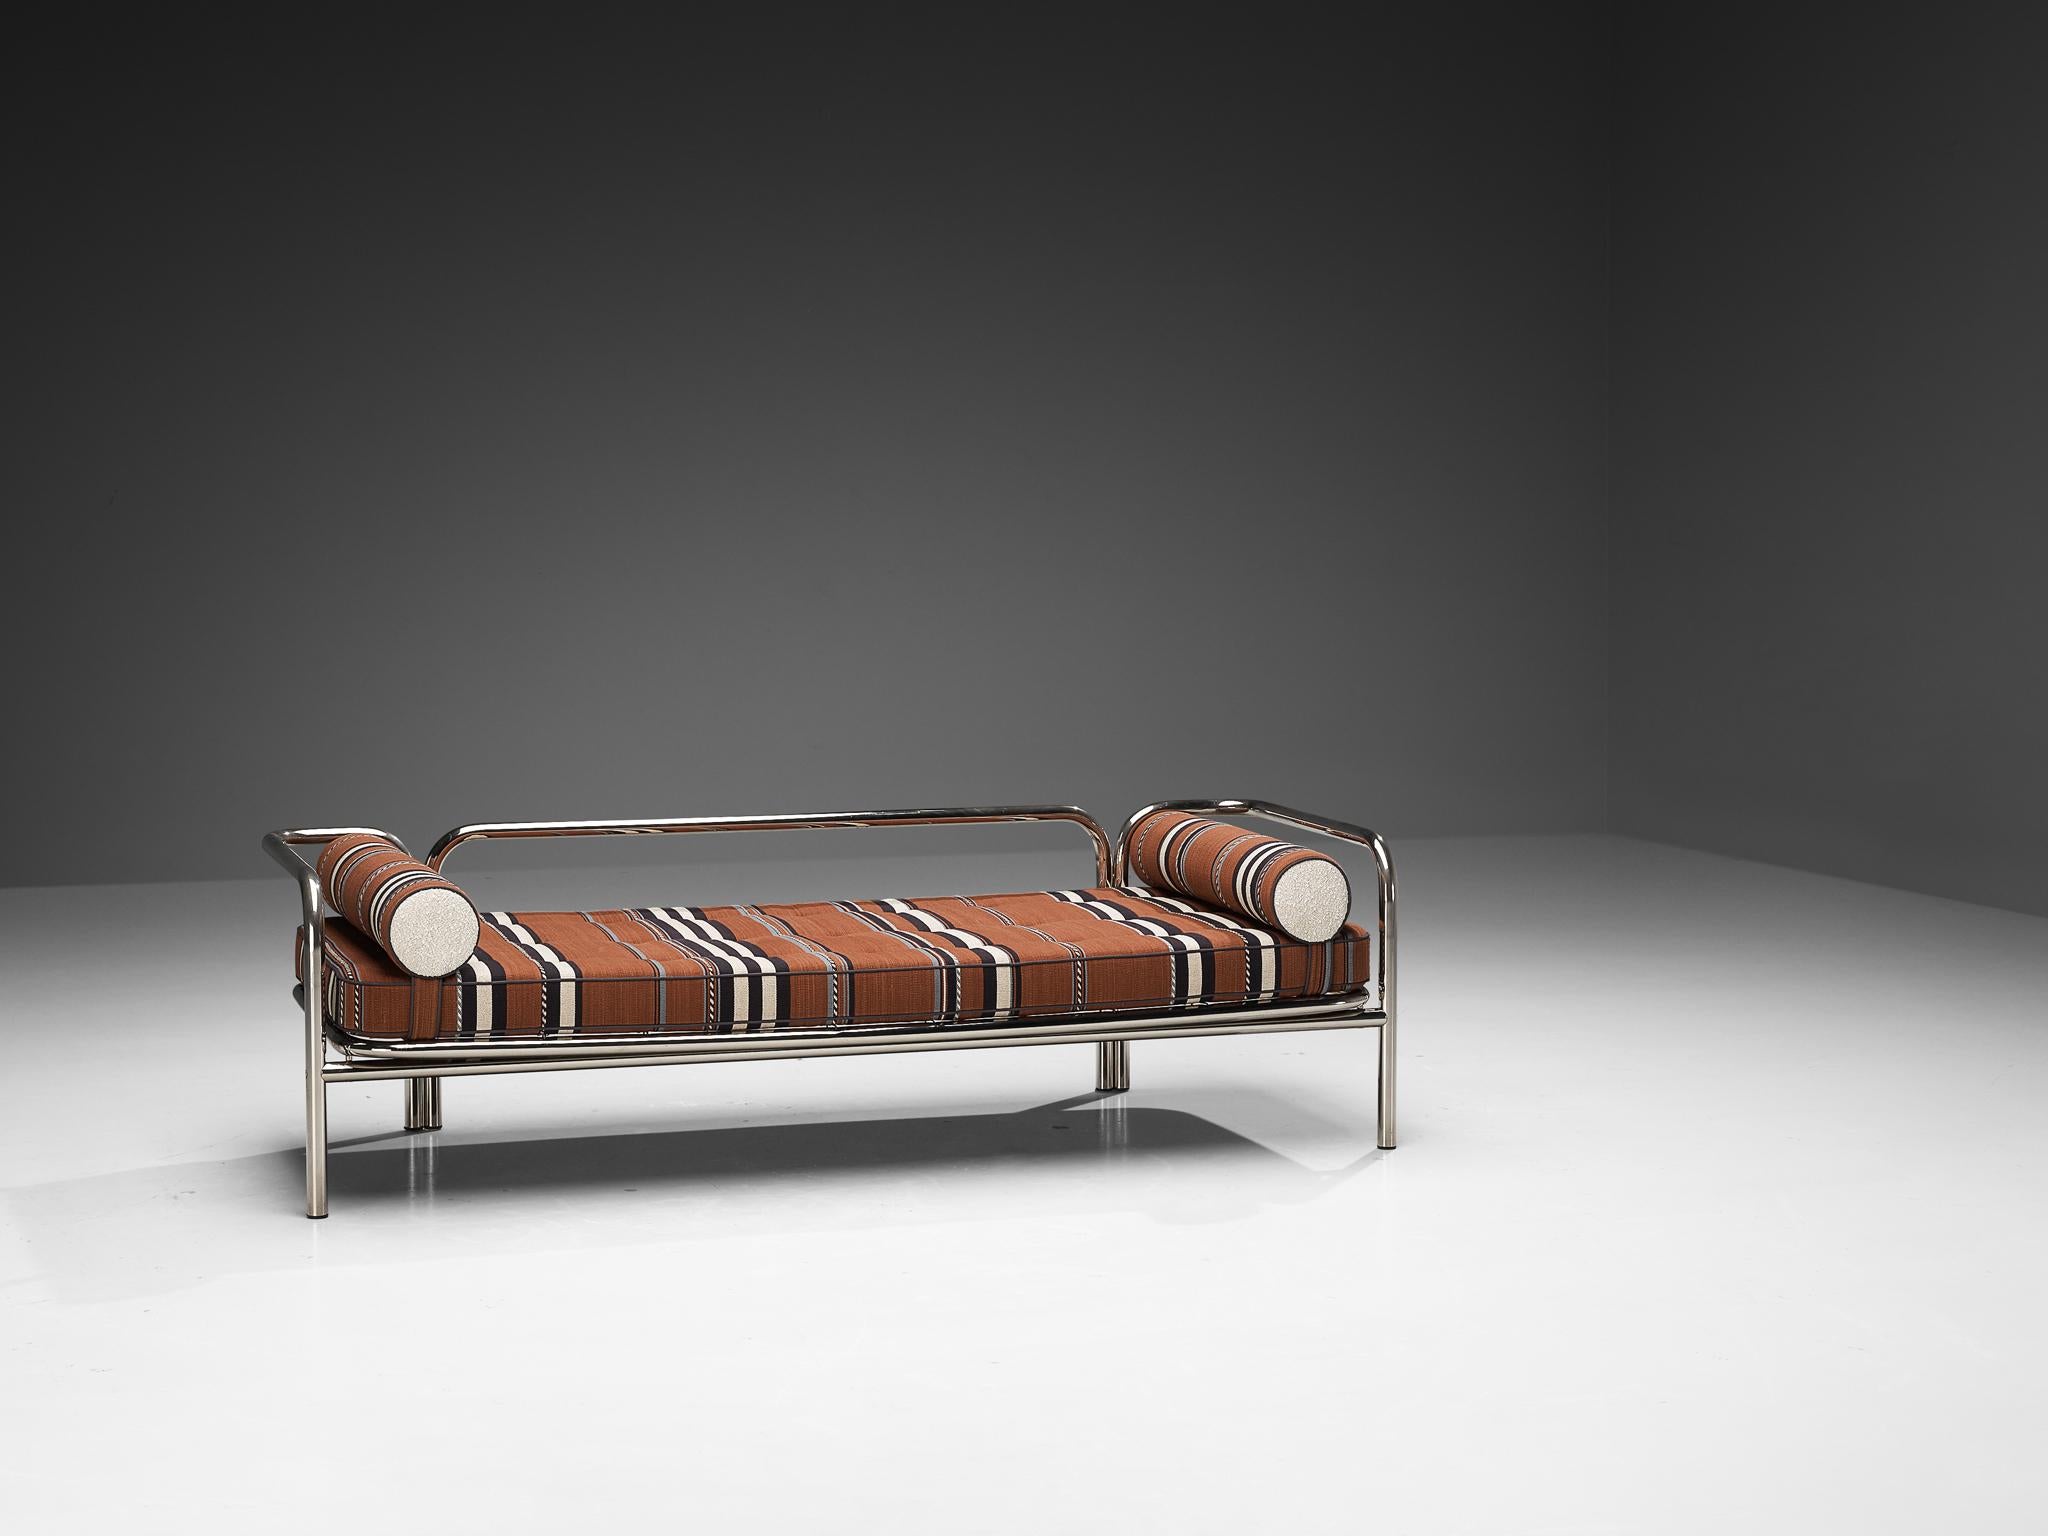 Gae Aulenti for Poltronova 'Locus Solus' Daybed in Chrome-Plated Steel  1